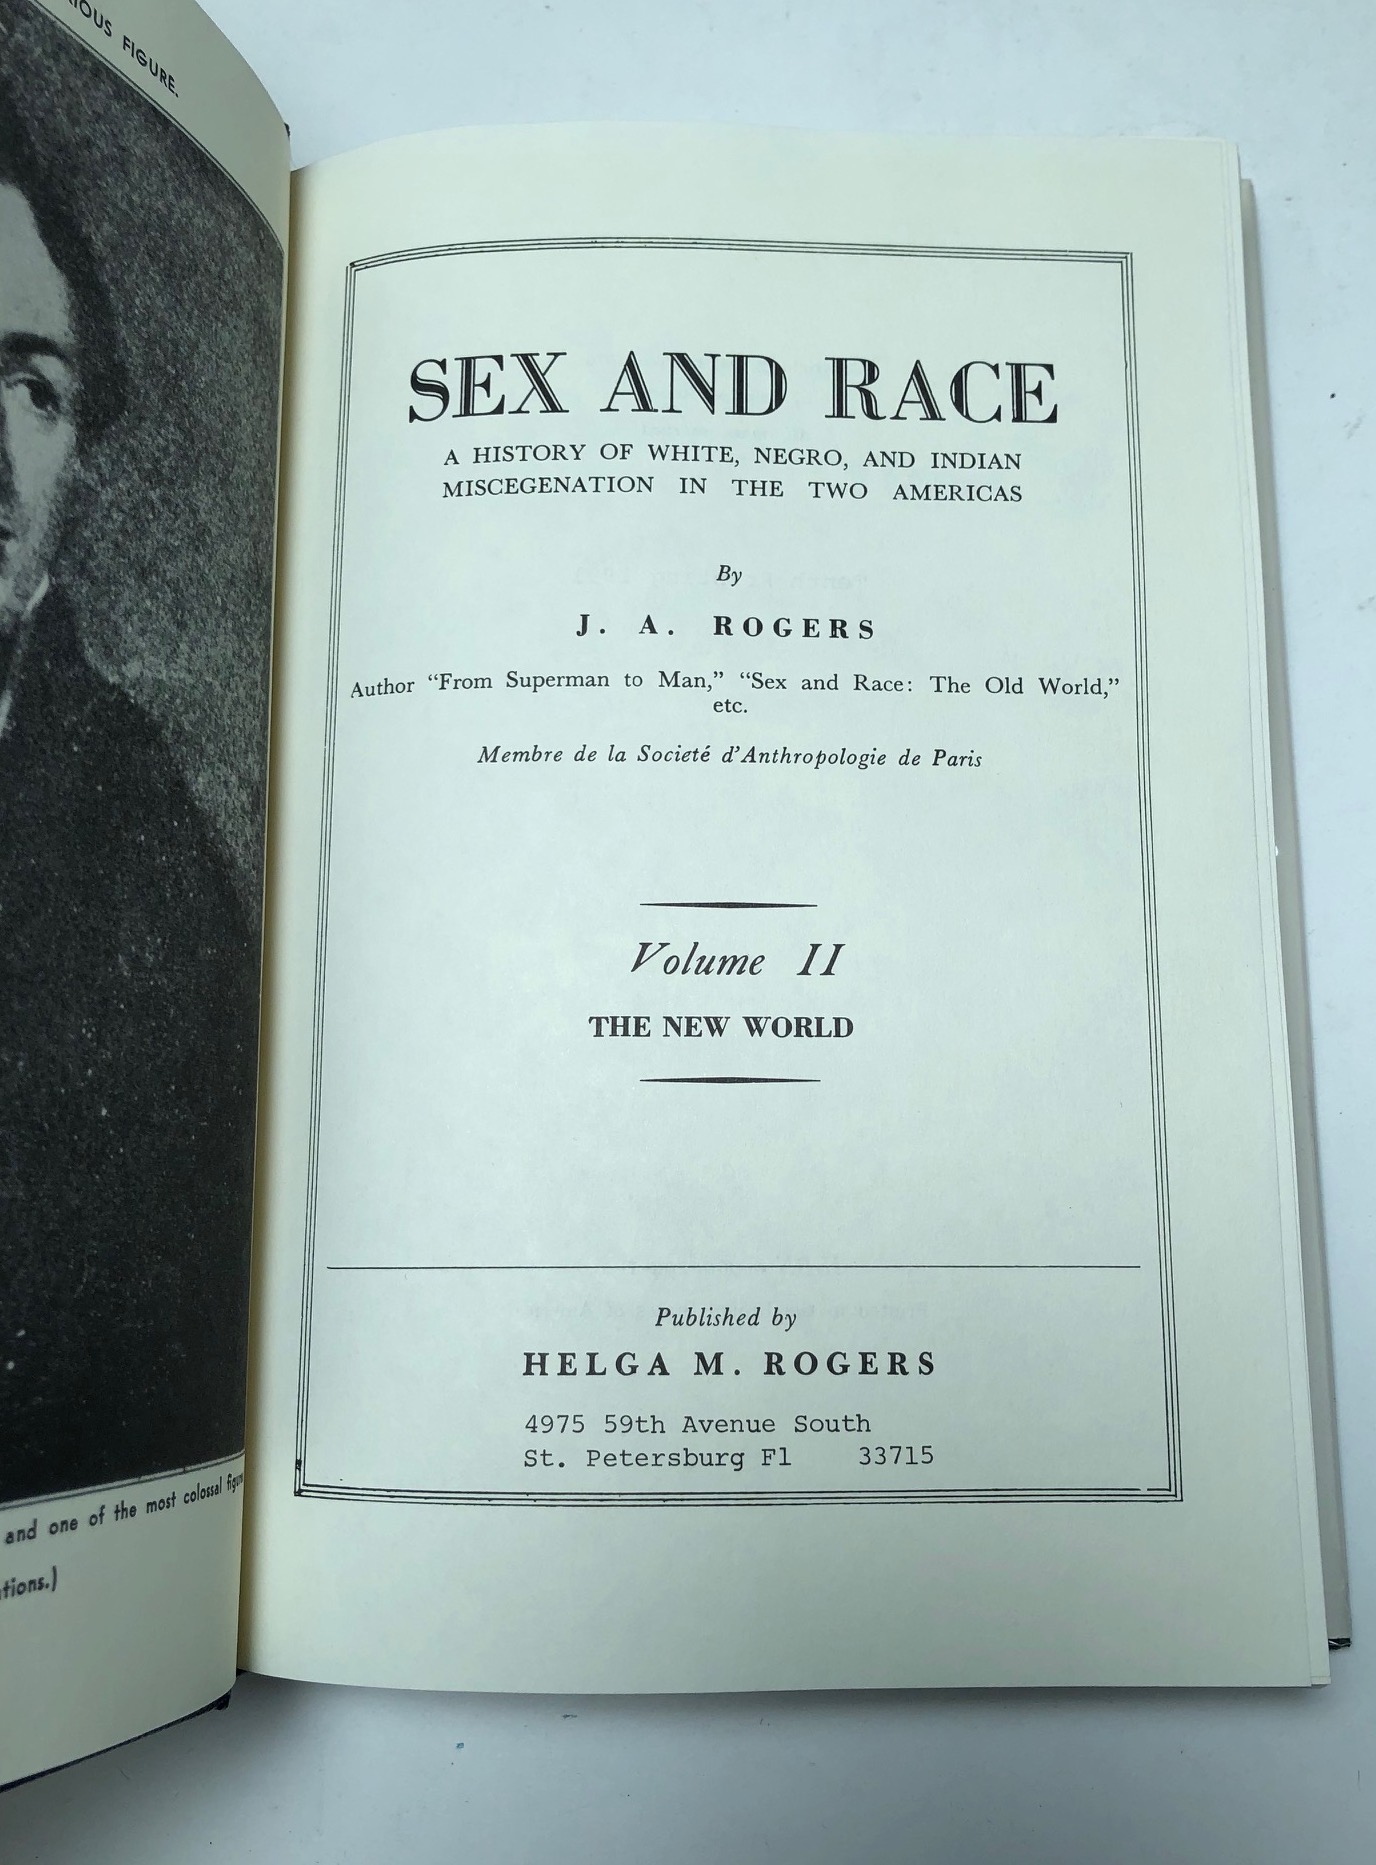 Sex And Race By J A Rogers Published By Helga M Rogers Hardback With Dust Jacket 3 Volumes